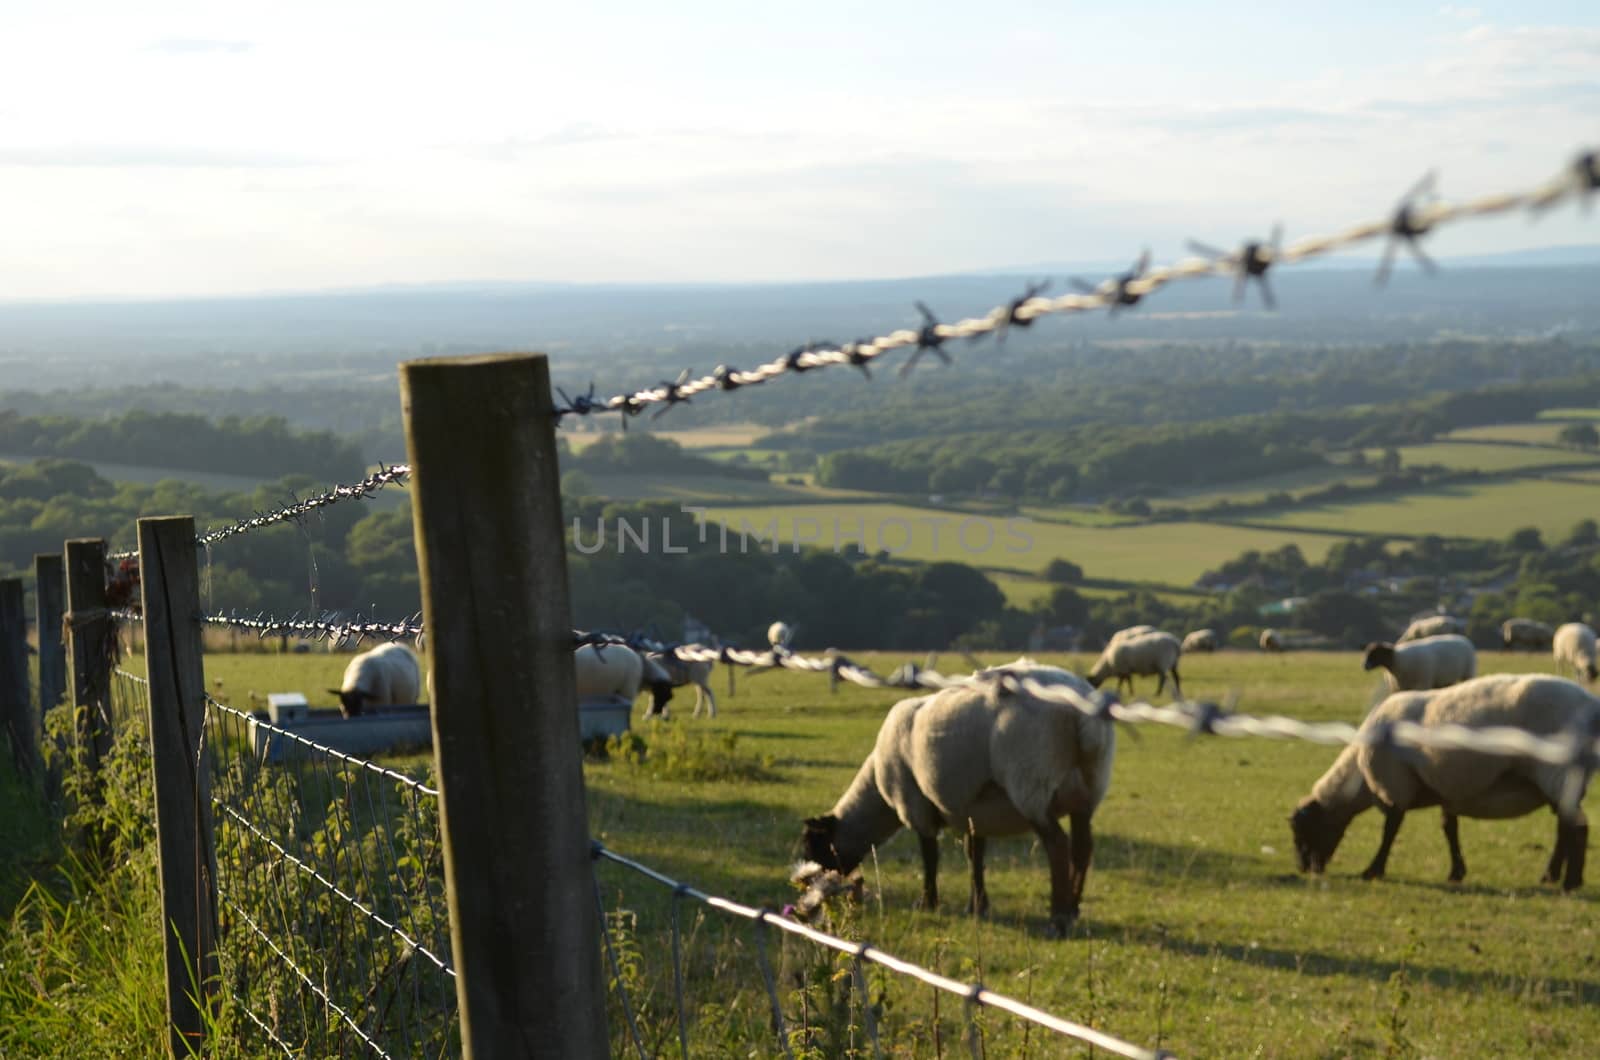 Sheep on the South Downs grazing on a farmers field penned in by a barbed wire fence with a view of the County of Sussex in the foreground.